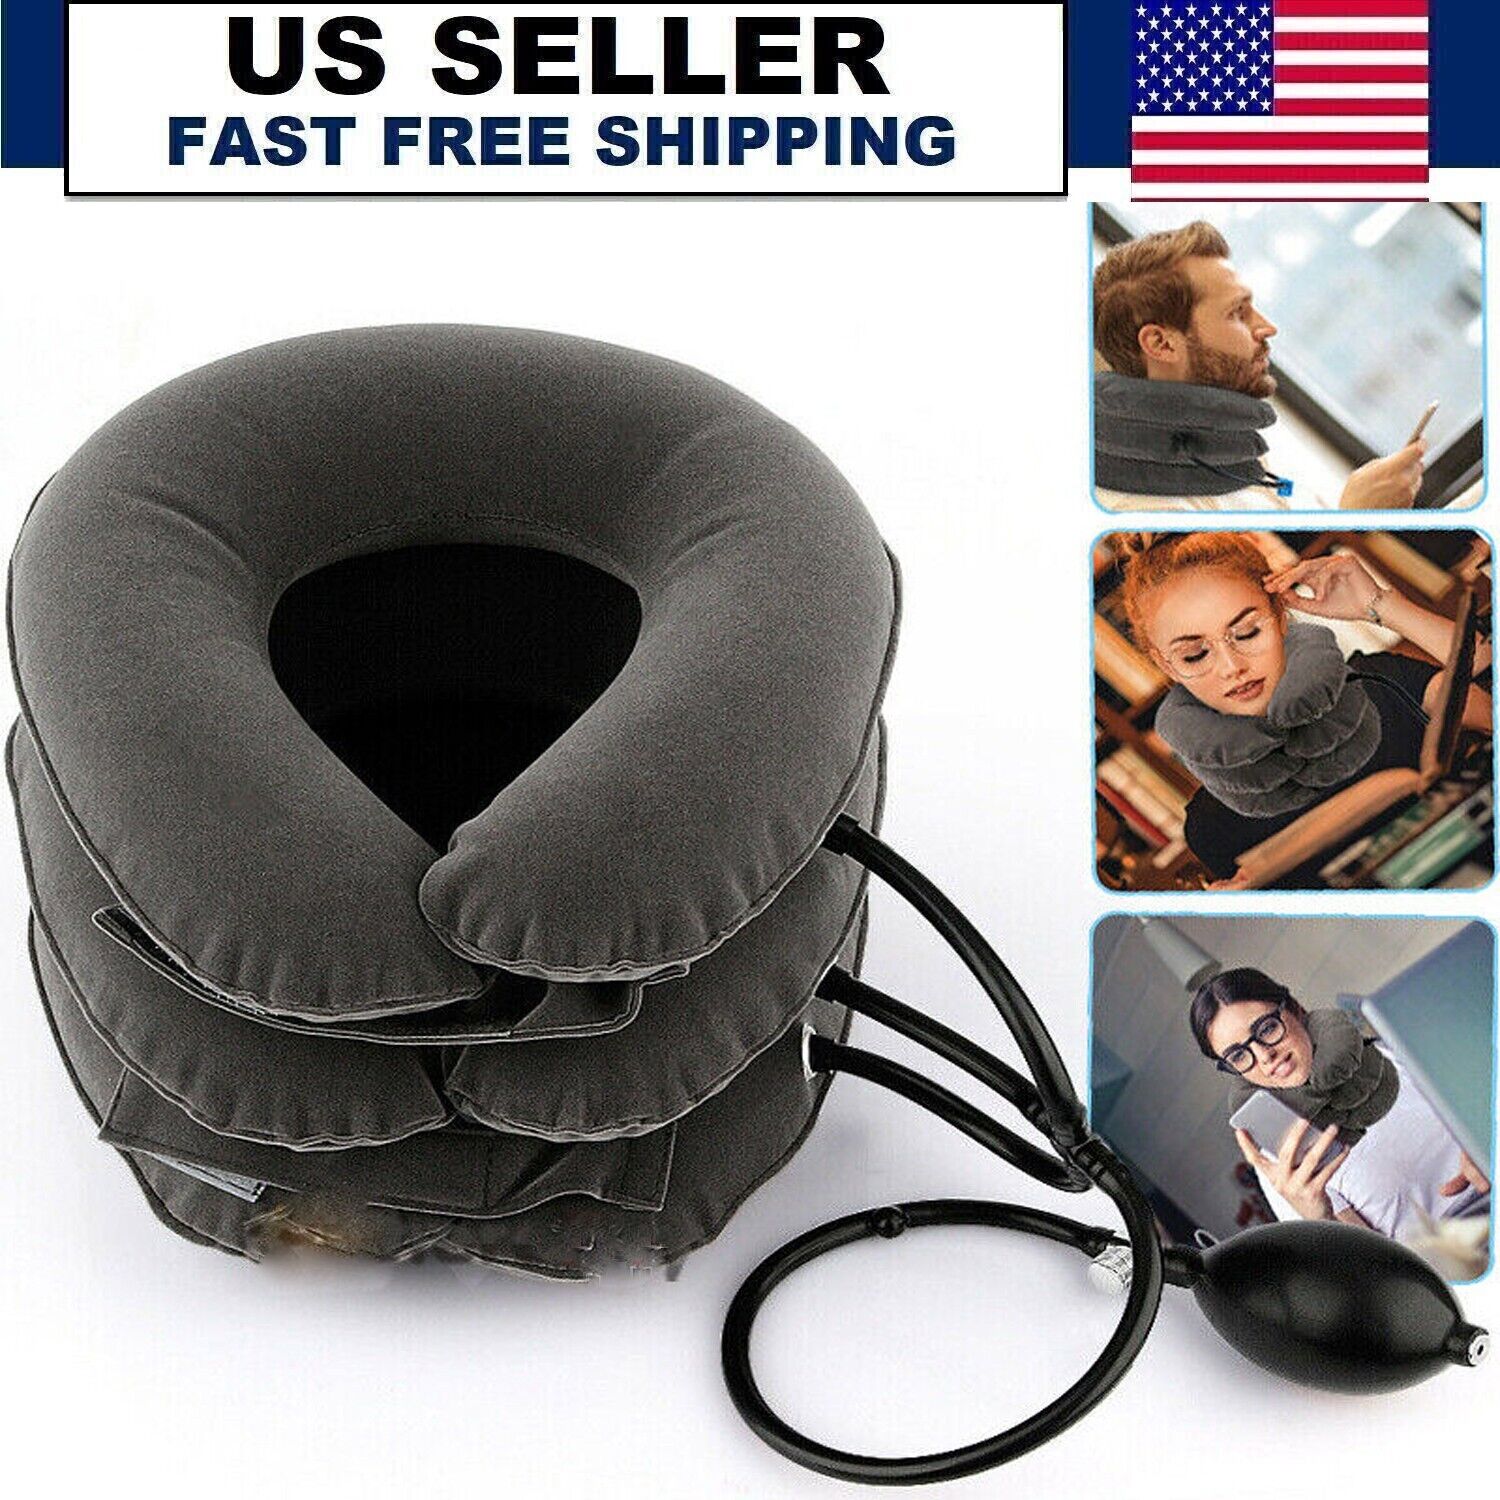 Cervical Neck Traction Device Collar Brace Support Pain Relief Stretcher Therapy